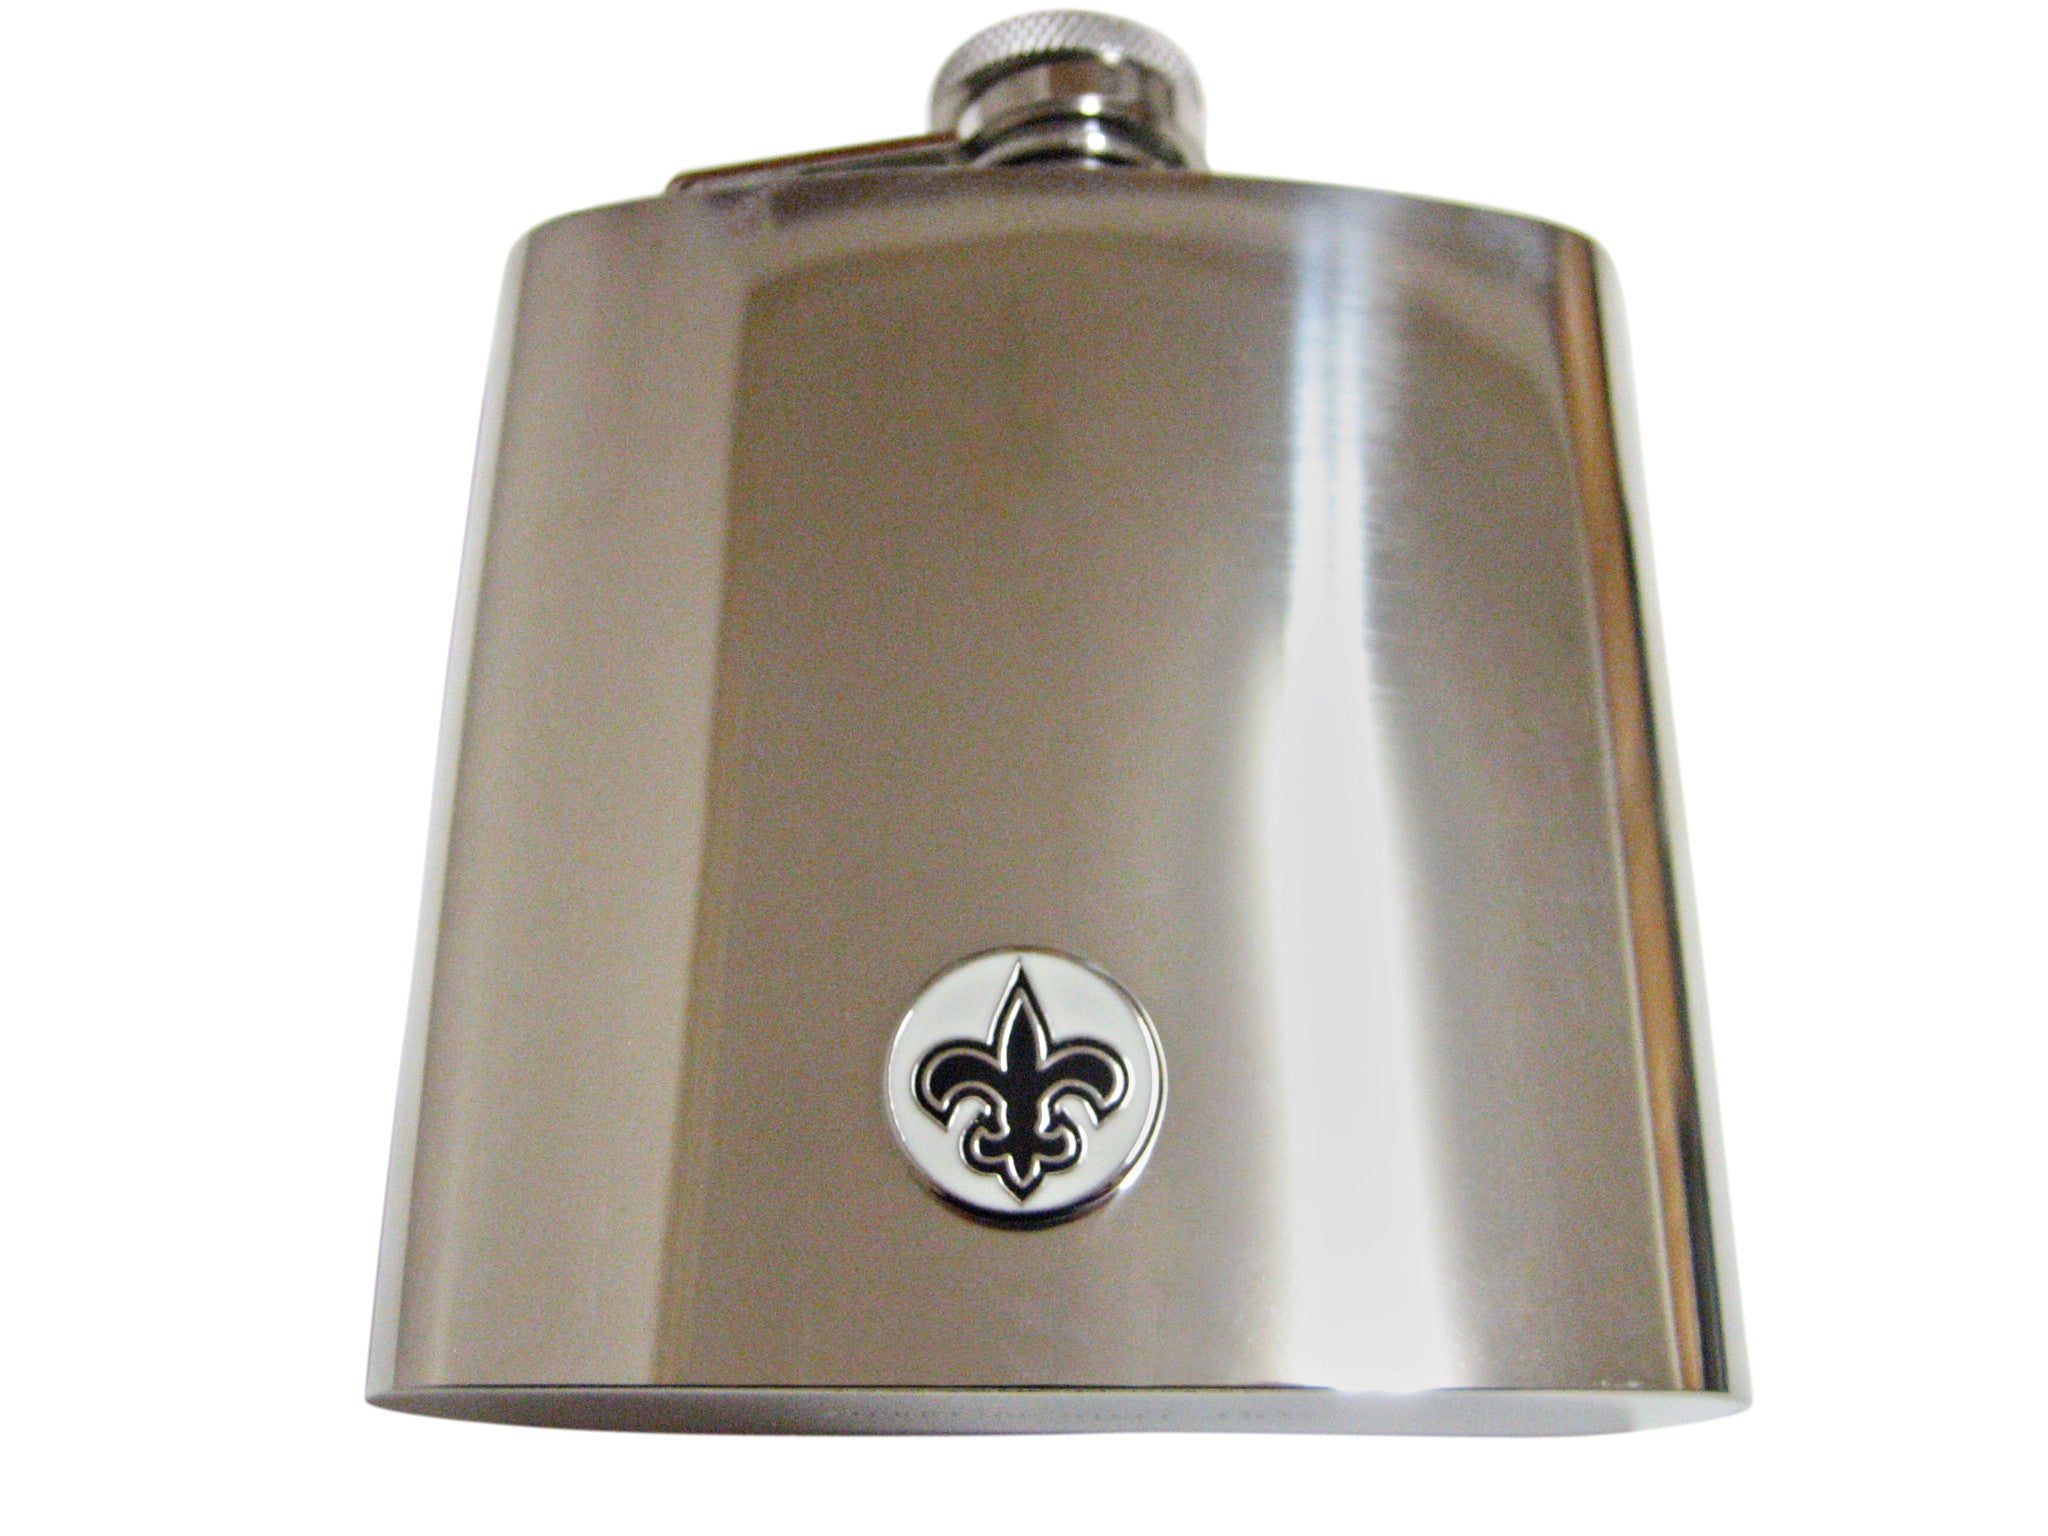 Black and White Fleur de Lys 6 Oz. Stainless Steel Flask